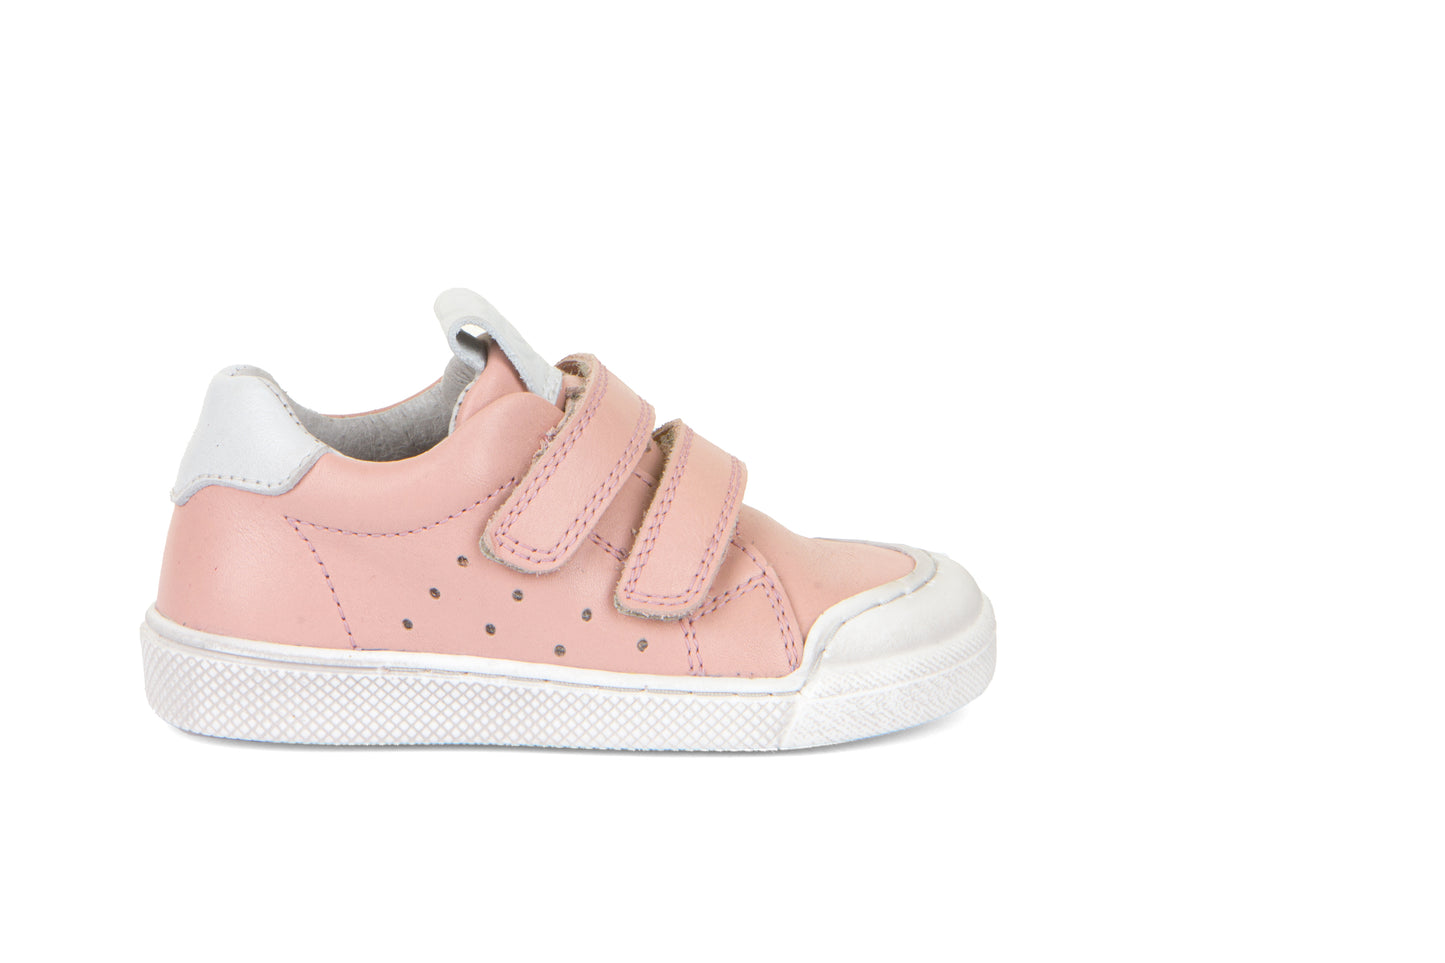 A girls casual shoe by Froddo, style G2130290-4 Rosario, in pink wit white trim,velcro fastening. Right side view.